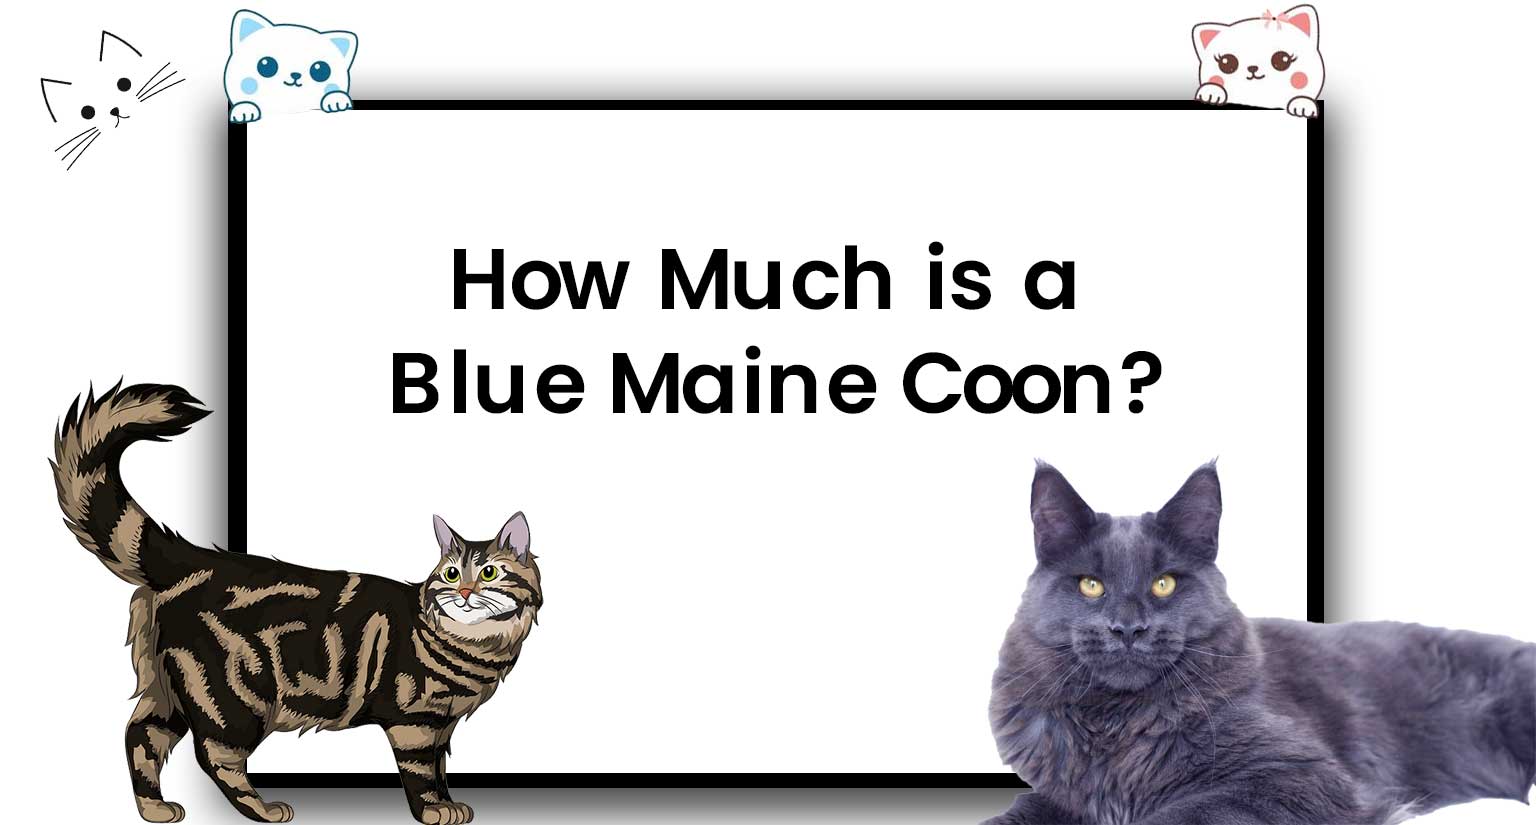 How much is a blue maine coon